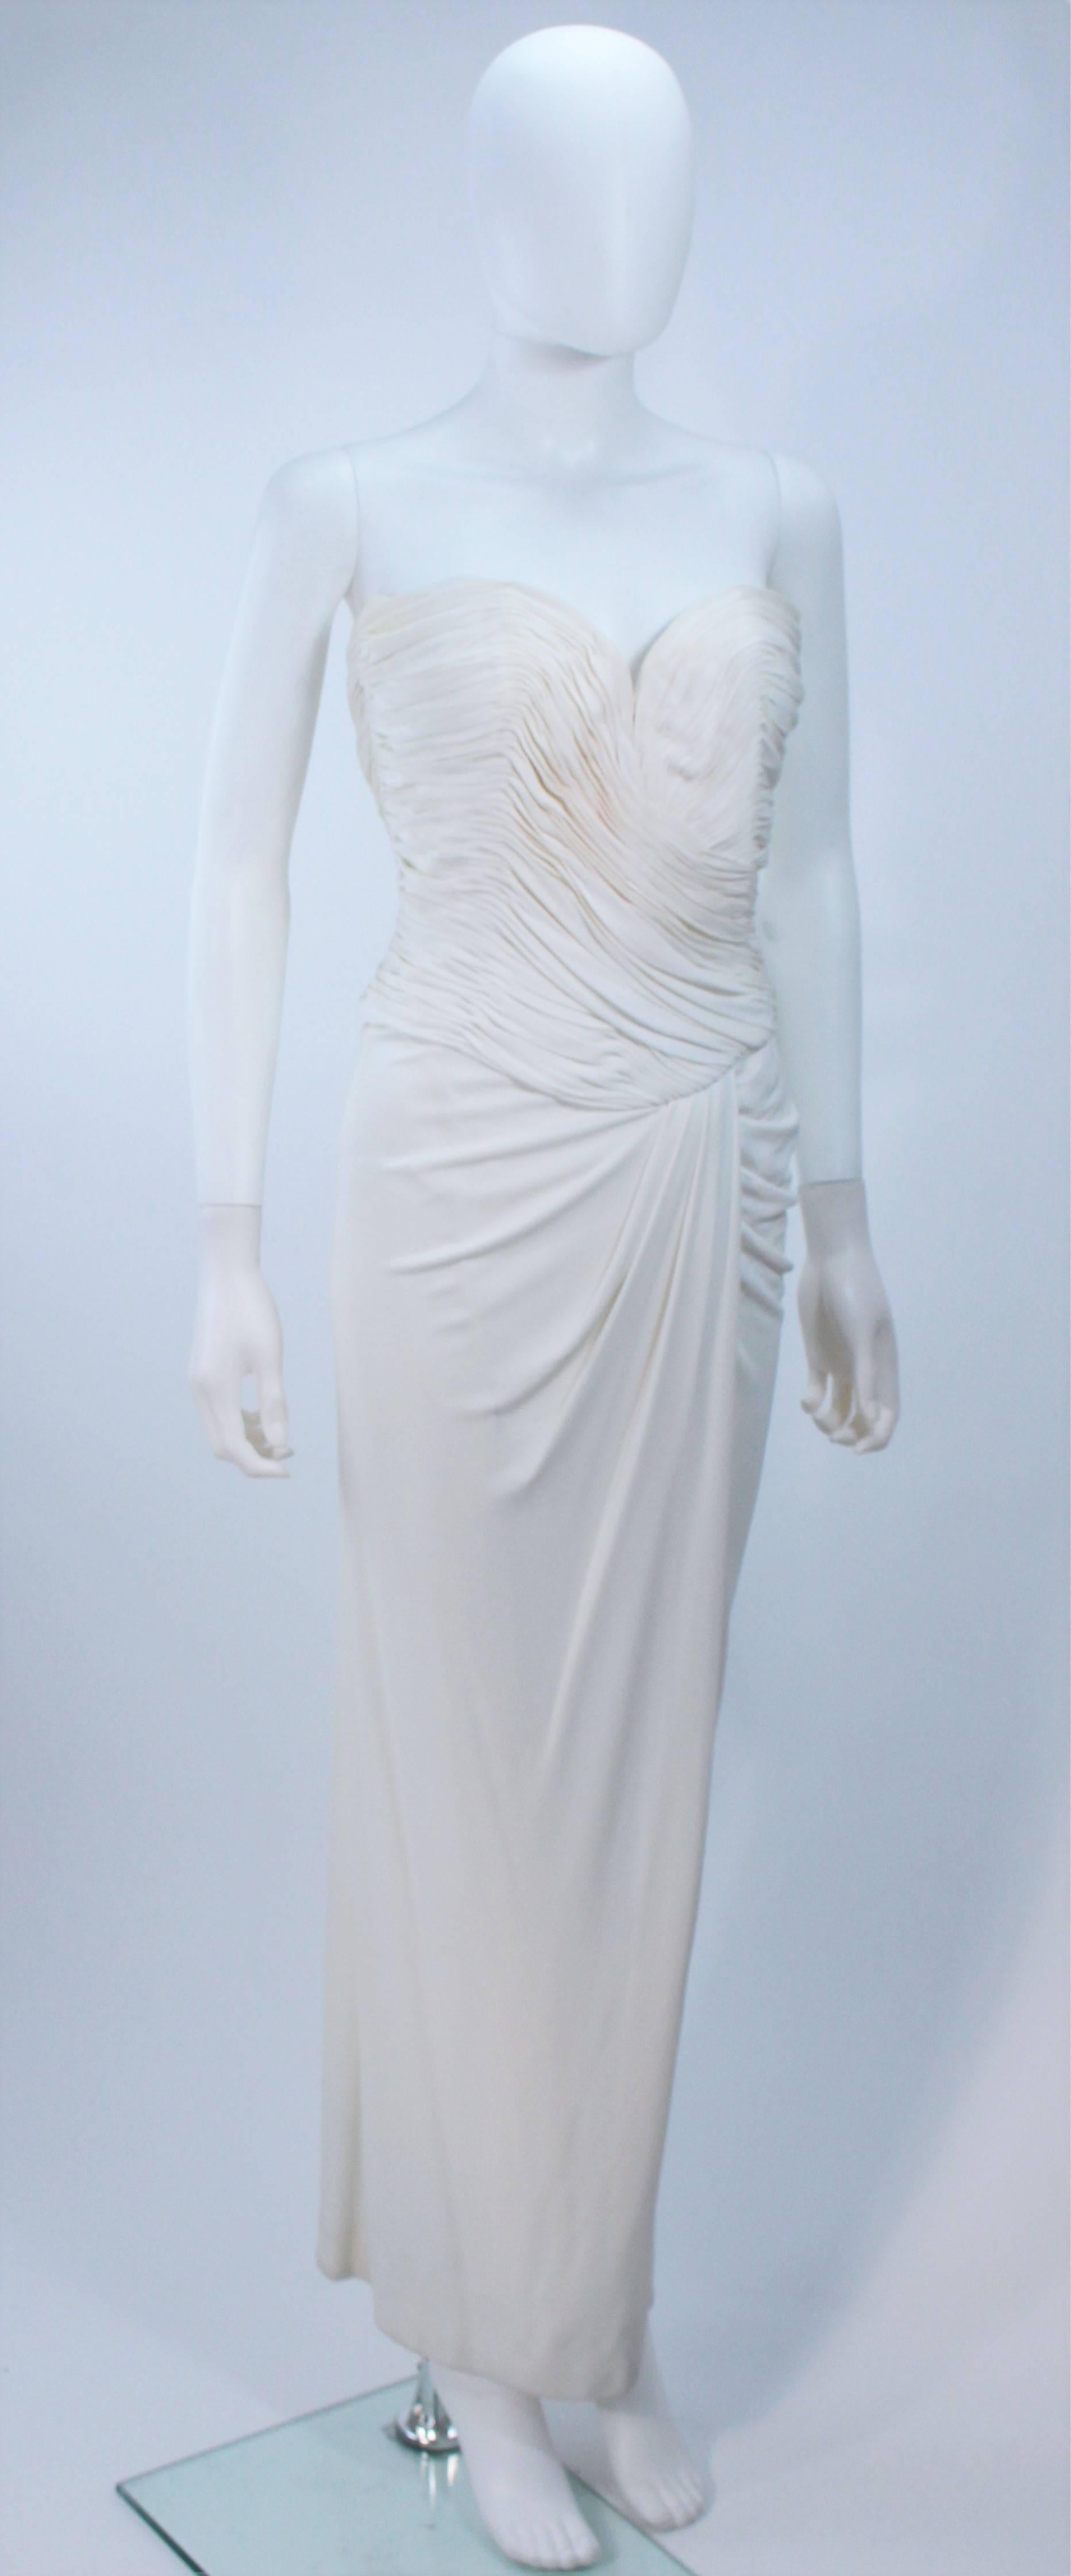  This Vicky Tiel  gown is composed of a draped jersey. Features a ruched bodice, front slit, and sweetheart neckline. There is a center back zipper closure with interior boning. In great vintage condition. 

  **Please cross-reference measurements